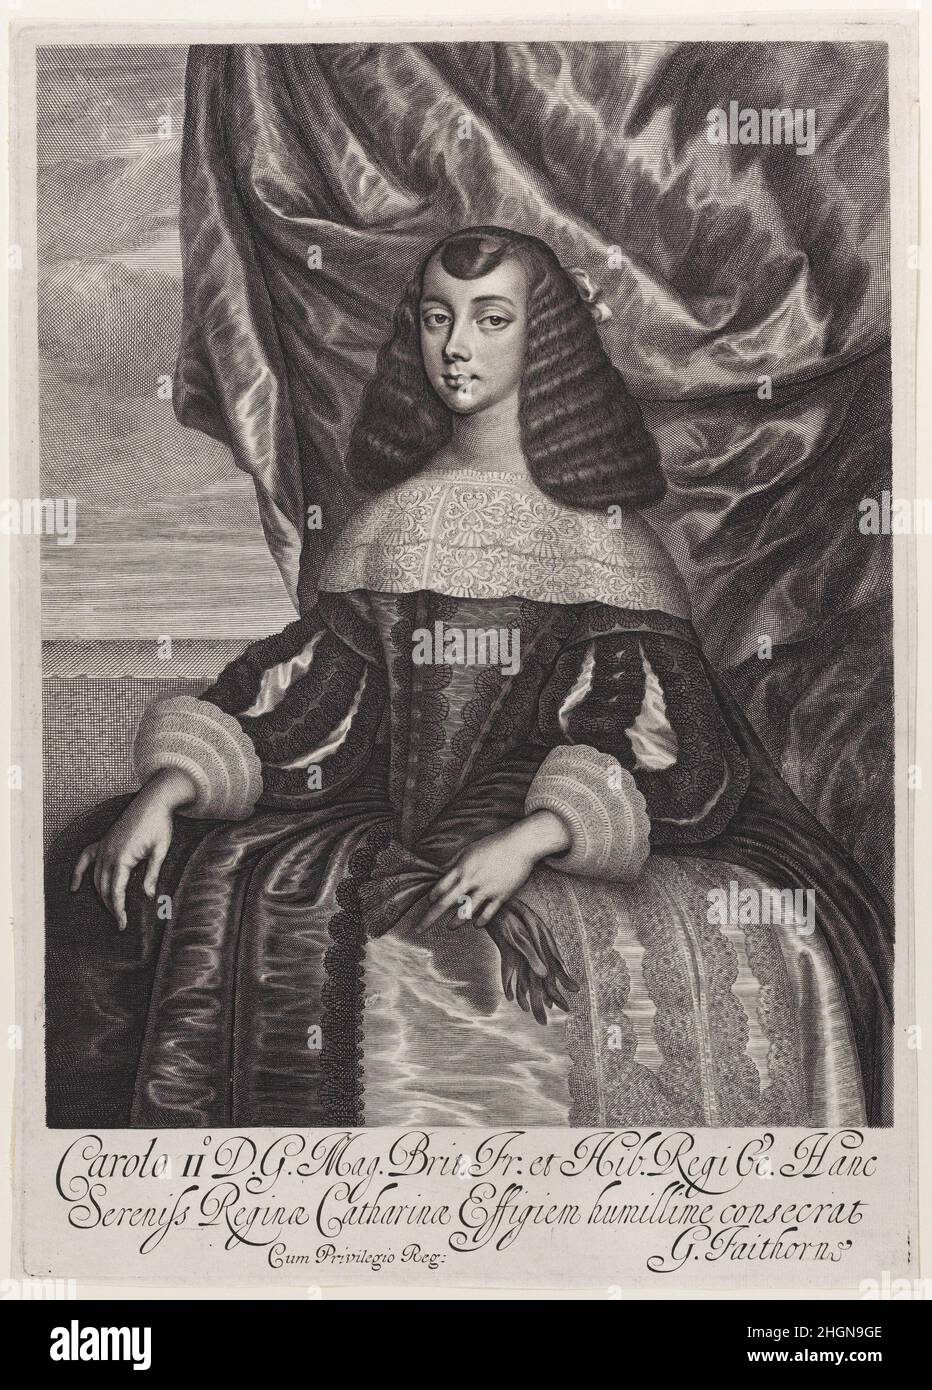 Catherine of Braganza 1662 William Faithorne the Elder Faithorned based this print on a portrait that Dirk Stoop painted of the Portuguese princess Catherine of Braganaza in 1661 as her marriage to King Charles II was being negotiated--the painting was then sent to England. Catherine wears a dress of Portuguese fashion with a wide flat lace collar and wide skirts. She arrived in Portsmouth on May 13, 1662 and the marriage took place on May 21. Faithorne's engraving was made around this time to satisfy English curiosity about Catherine's appearance.. Catherine of Braganza. After Dirck Stoop (Du Stock Photo